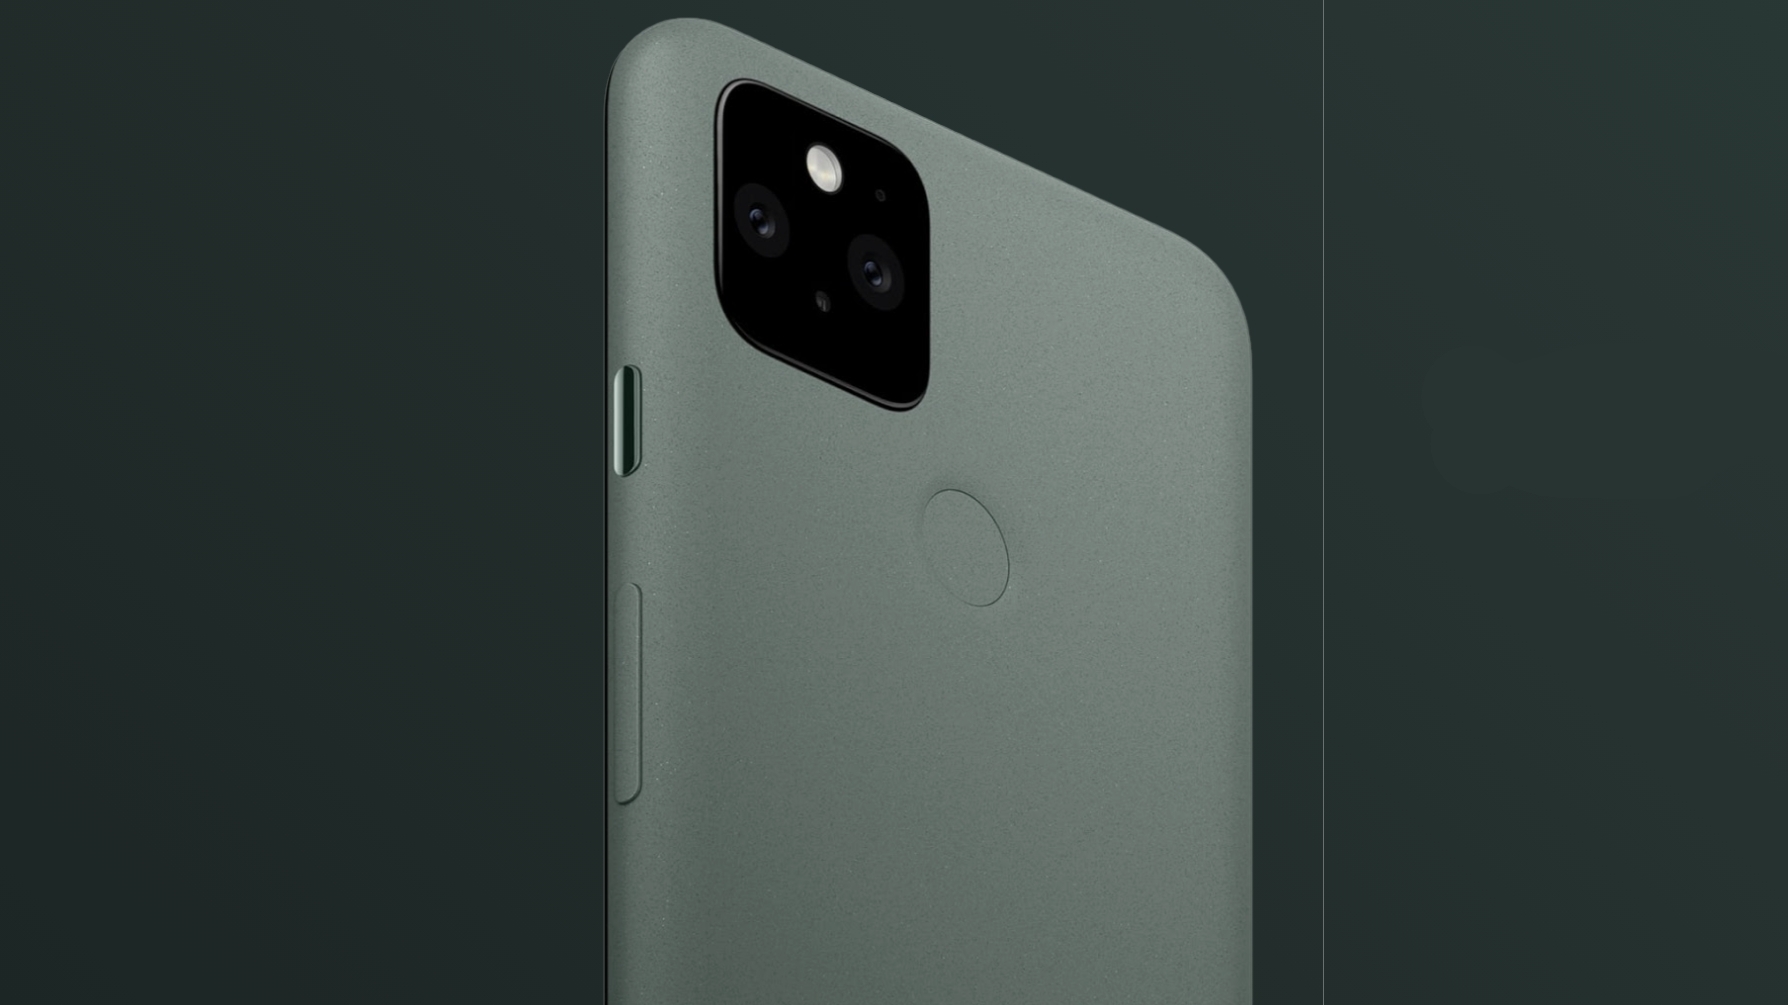 Alleged Pixel 5 Pro leaked images hint at an in-display selfie camera